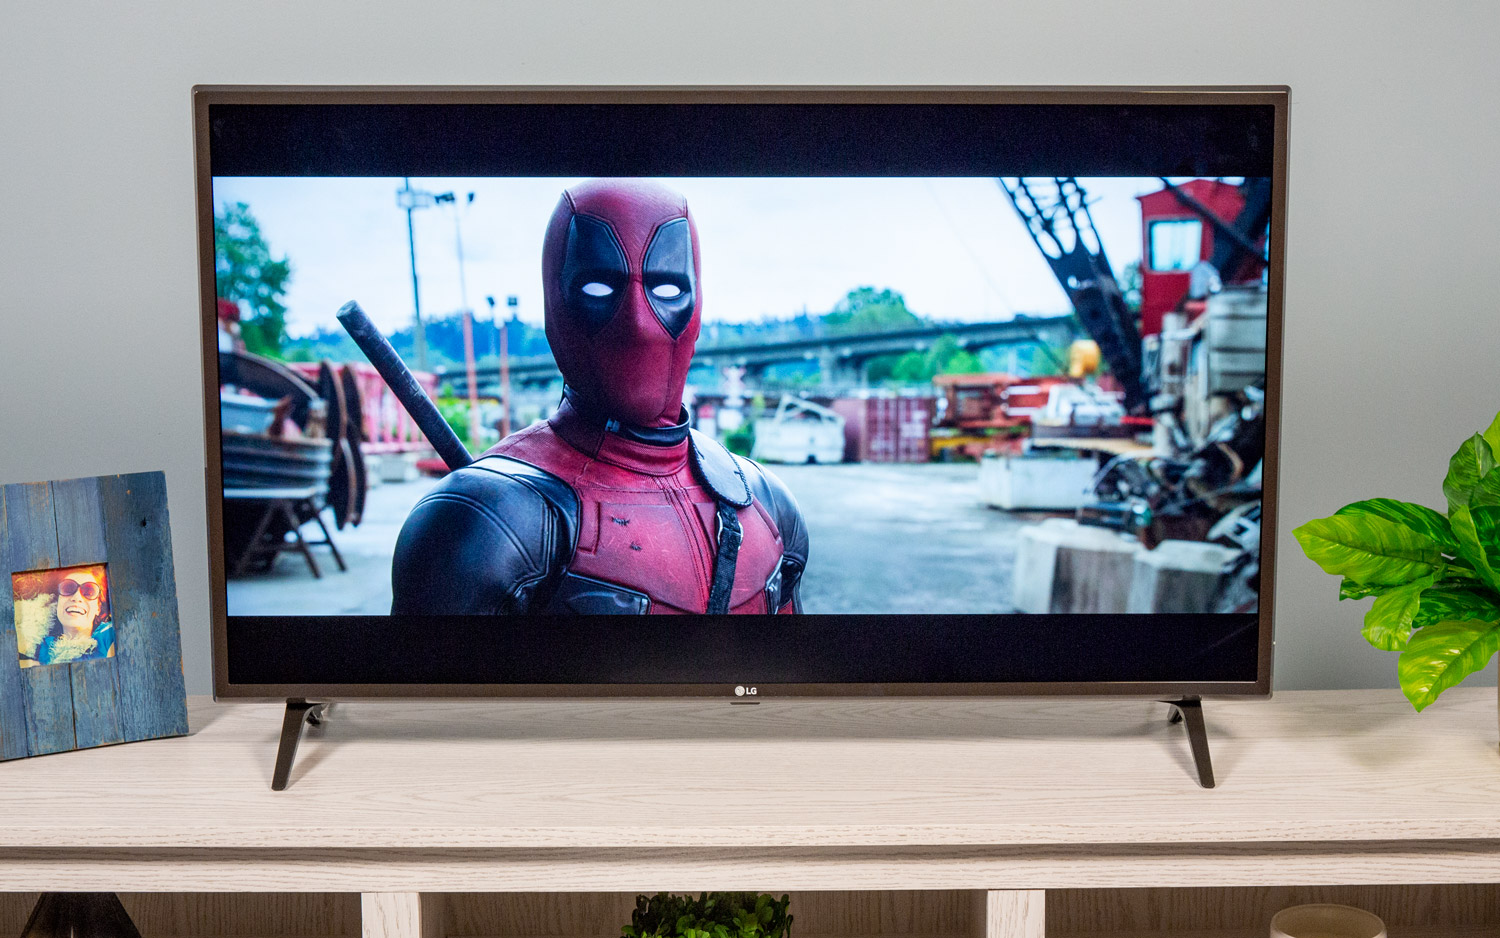 lift wall Implement LG UK6300 43-Inch 4K TV - Full Review and Benchmarks | Tom's Guide